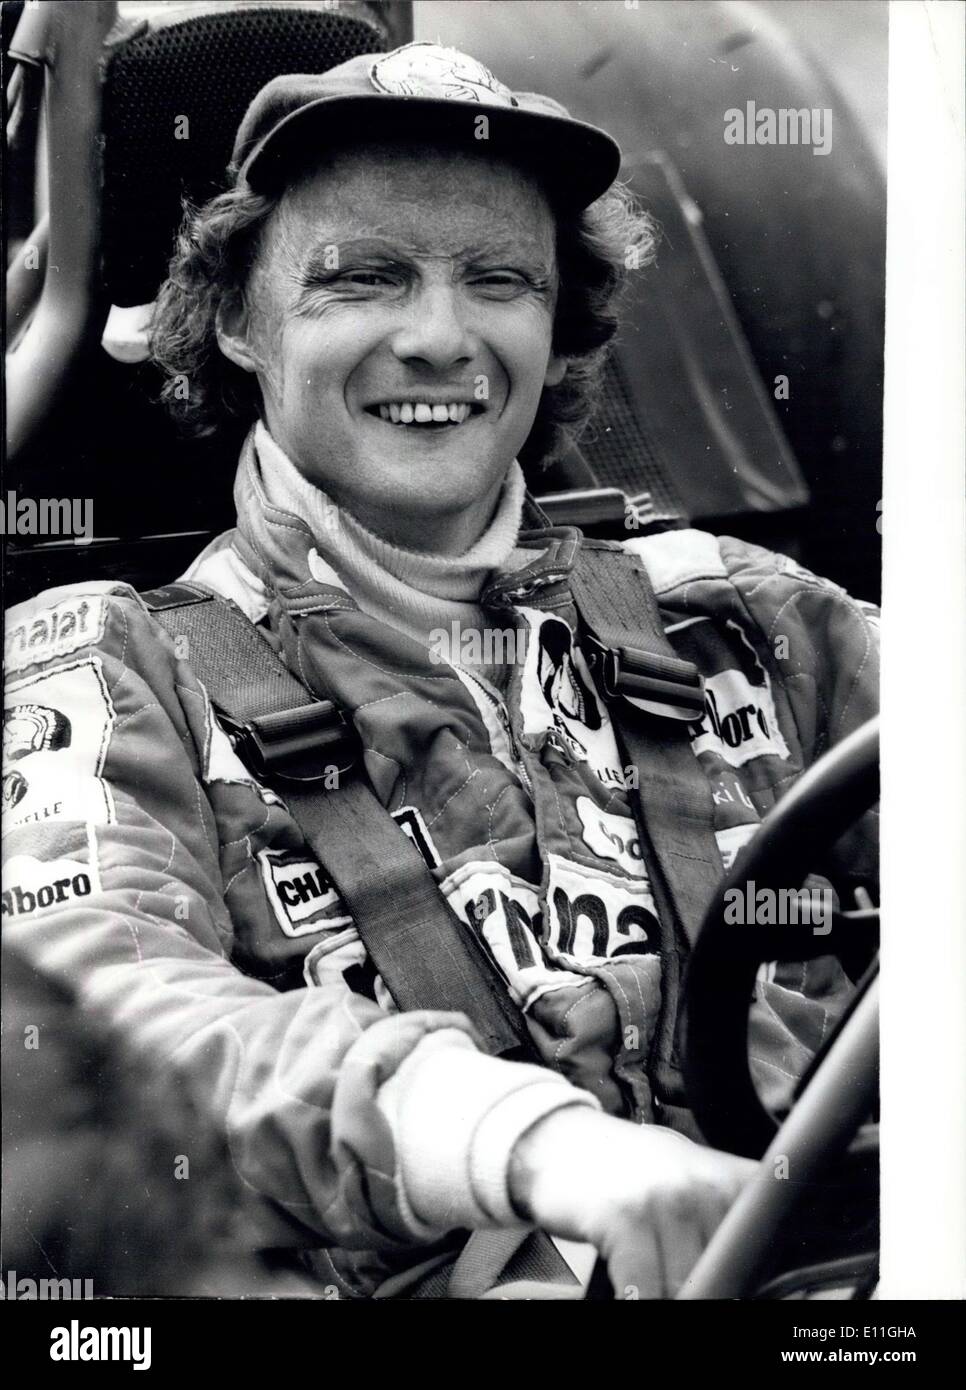 Nov. 15, 1977 - Niki Lauda Starts Trails With Brabham Alfa Romeo Car. World car racing champion Niki Laudat ried out the new BT45 12 cylinders Brabham Alfa Romeo Car today at the Vallelunga Autodrome near Rome, watched by a crowd of racing car fans. Lauda who quit Ferrari as their ace racing driver after winning the World Champion title, will now pilot Brabham Alfa Romeo Cars in next year's Formula 1 Races. Stock Photo